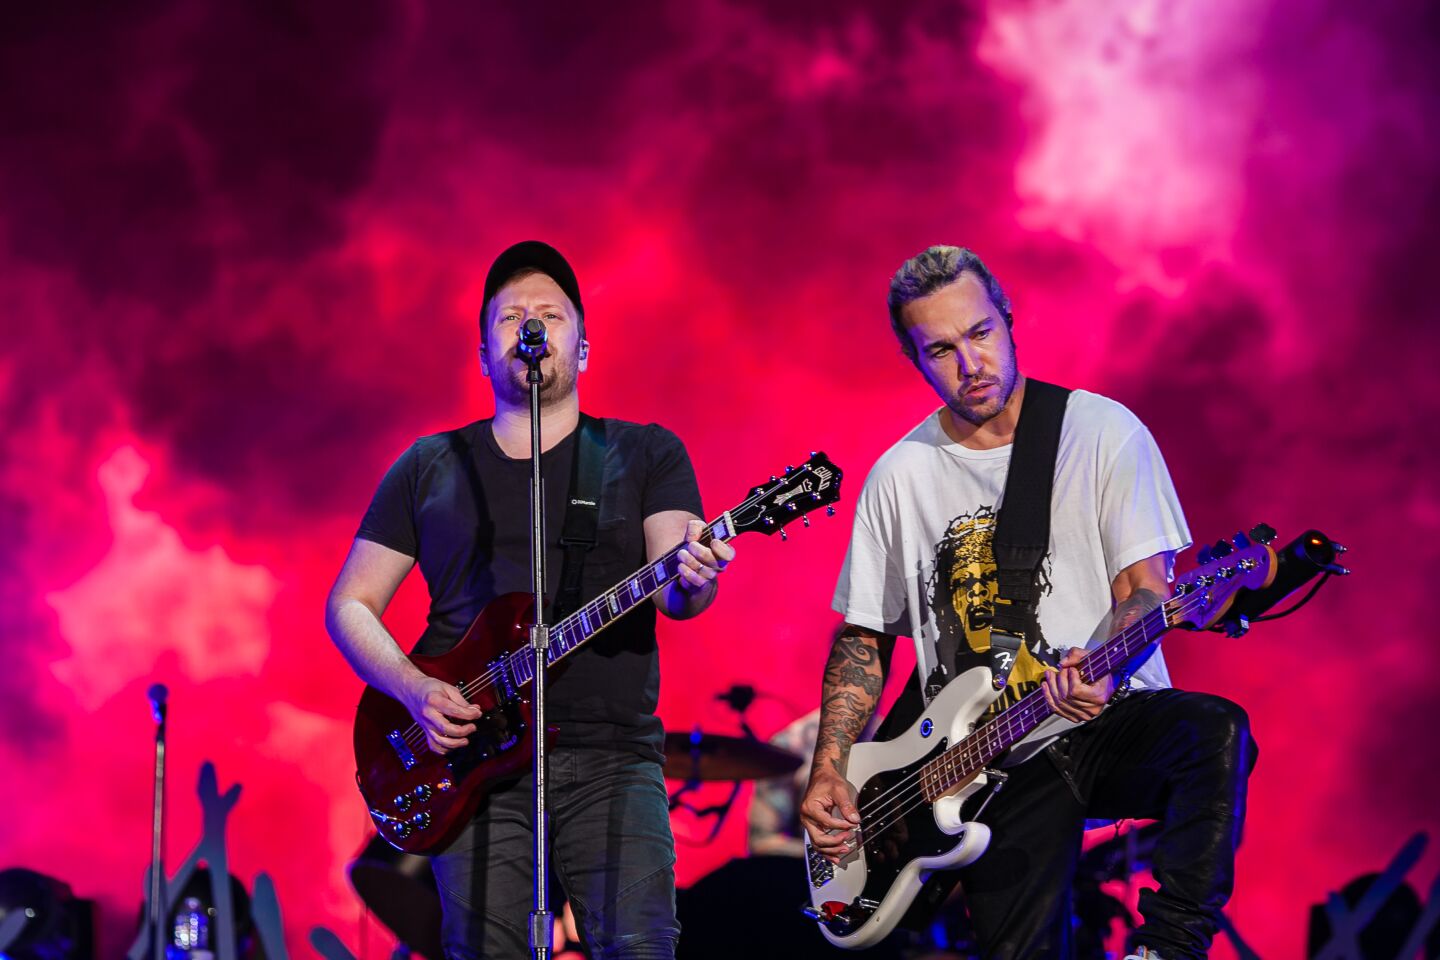 Singer Patrick Stump and Bassist Pete Wentz of Fall Out Boy during the Hella Mega Tour in downtown San Diego on August 29, 2021.